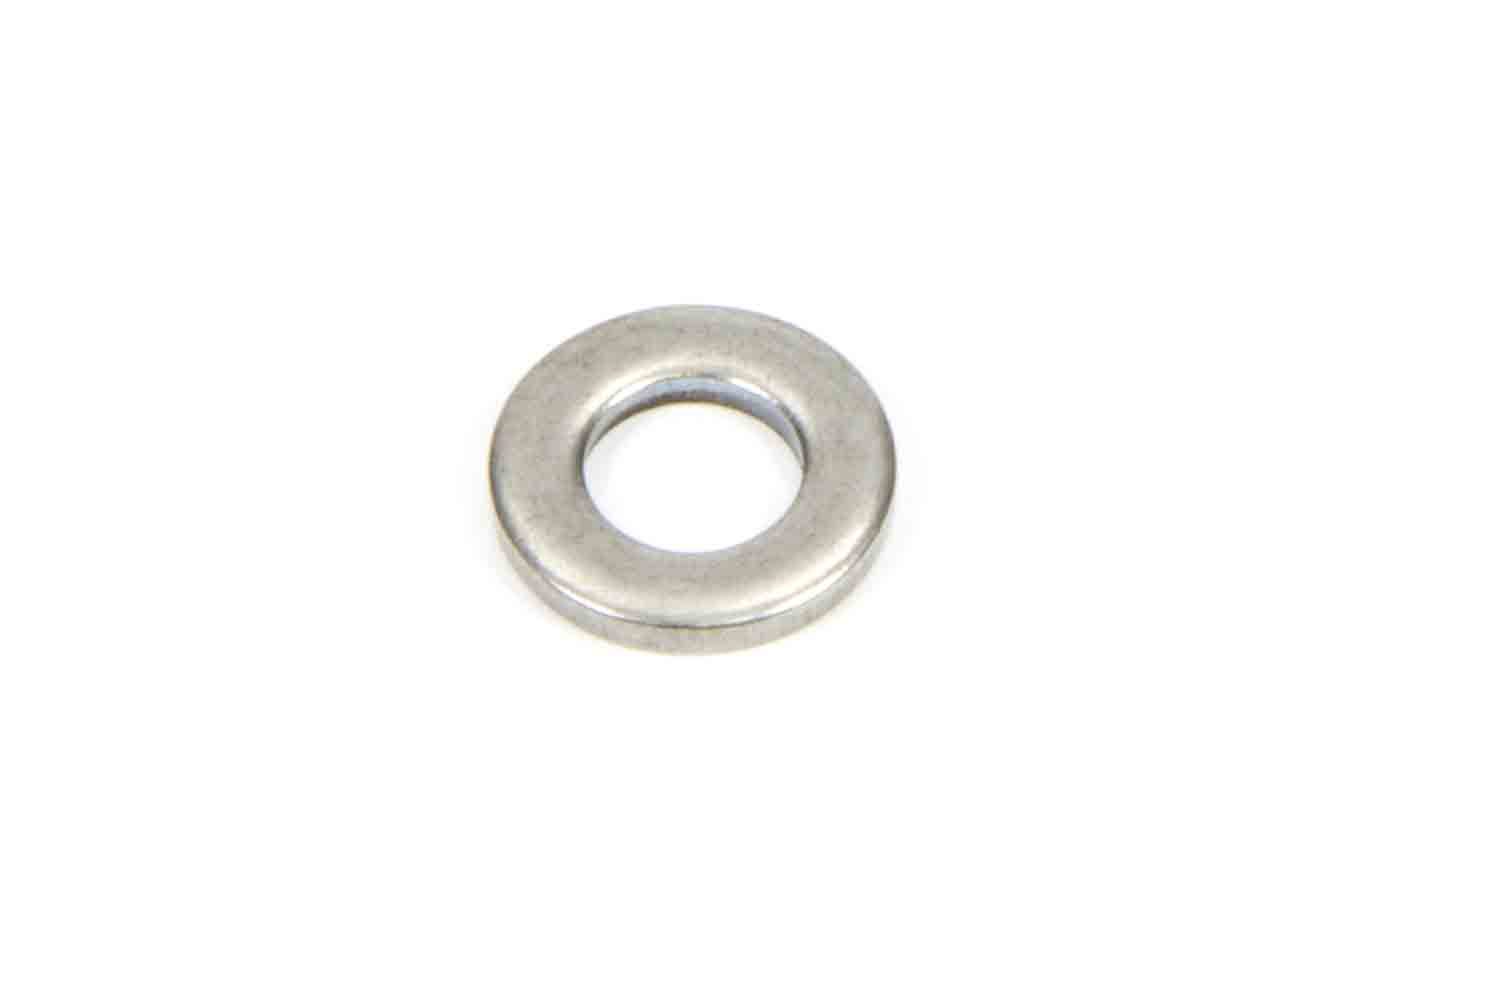 ARP, Stainless Steel Flat Washer - 1/4 ID x 1/2 OD (1)